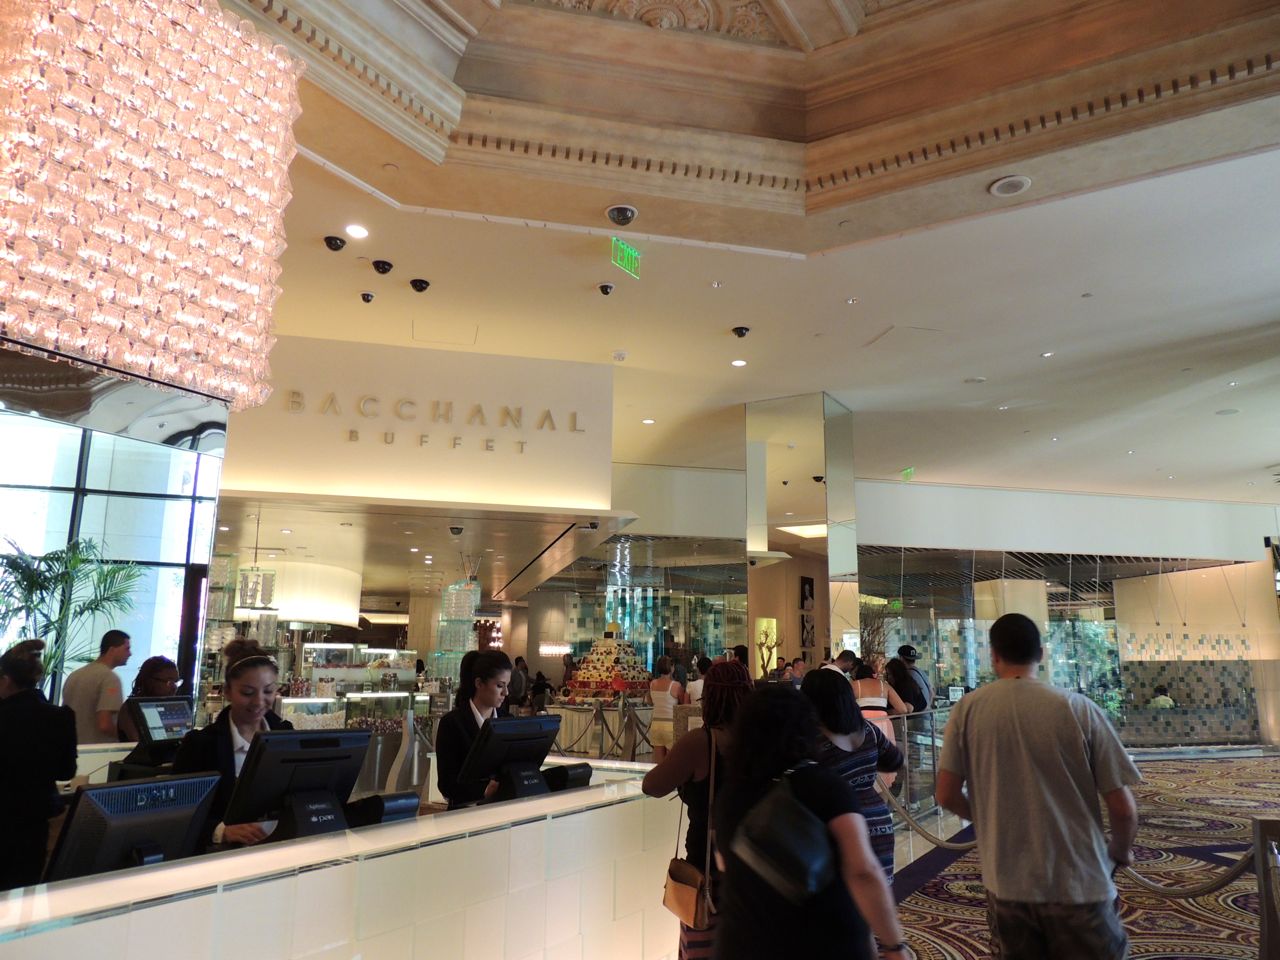 Eat Drink And Be Me: Bacchanal Buffet at Caesars Palace